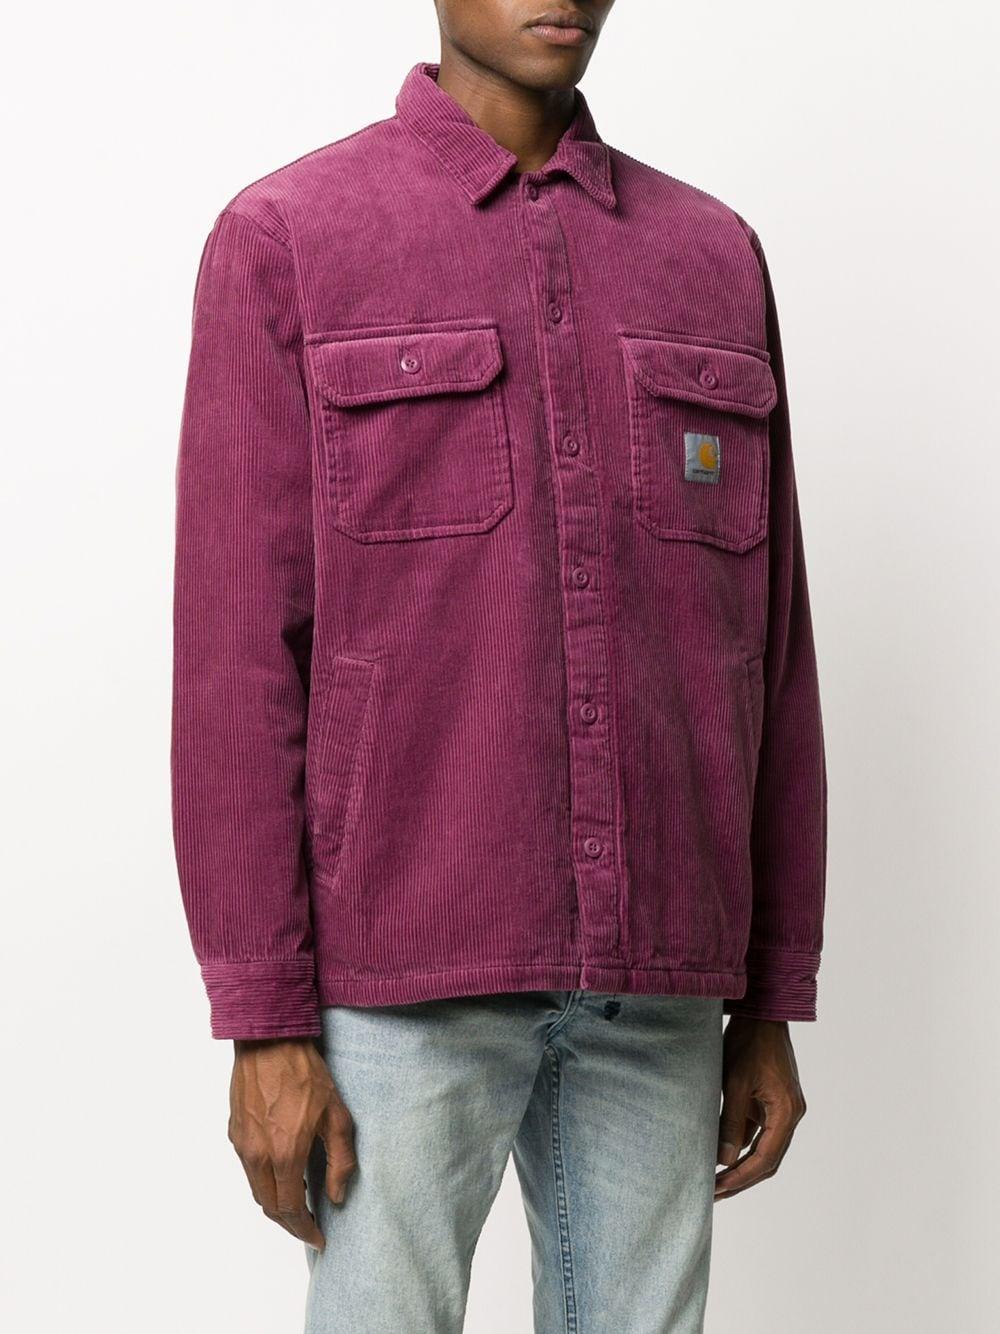 Carhartt WIP Whitsome Corduroy Shirt Jacket in Purple for Men - Lyst